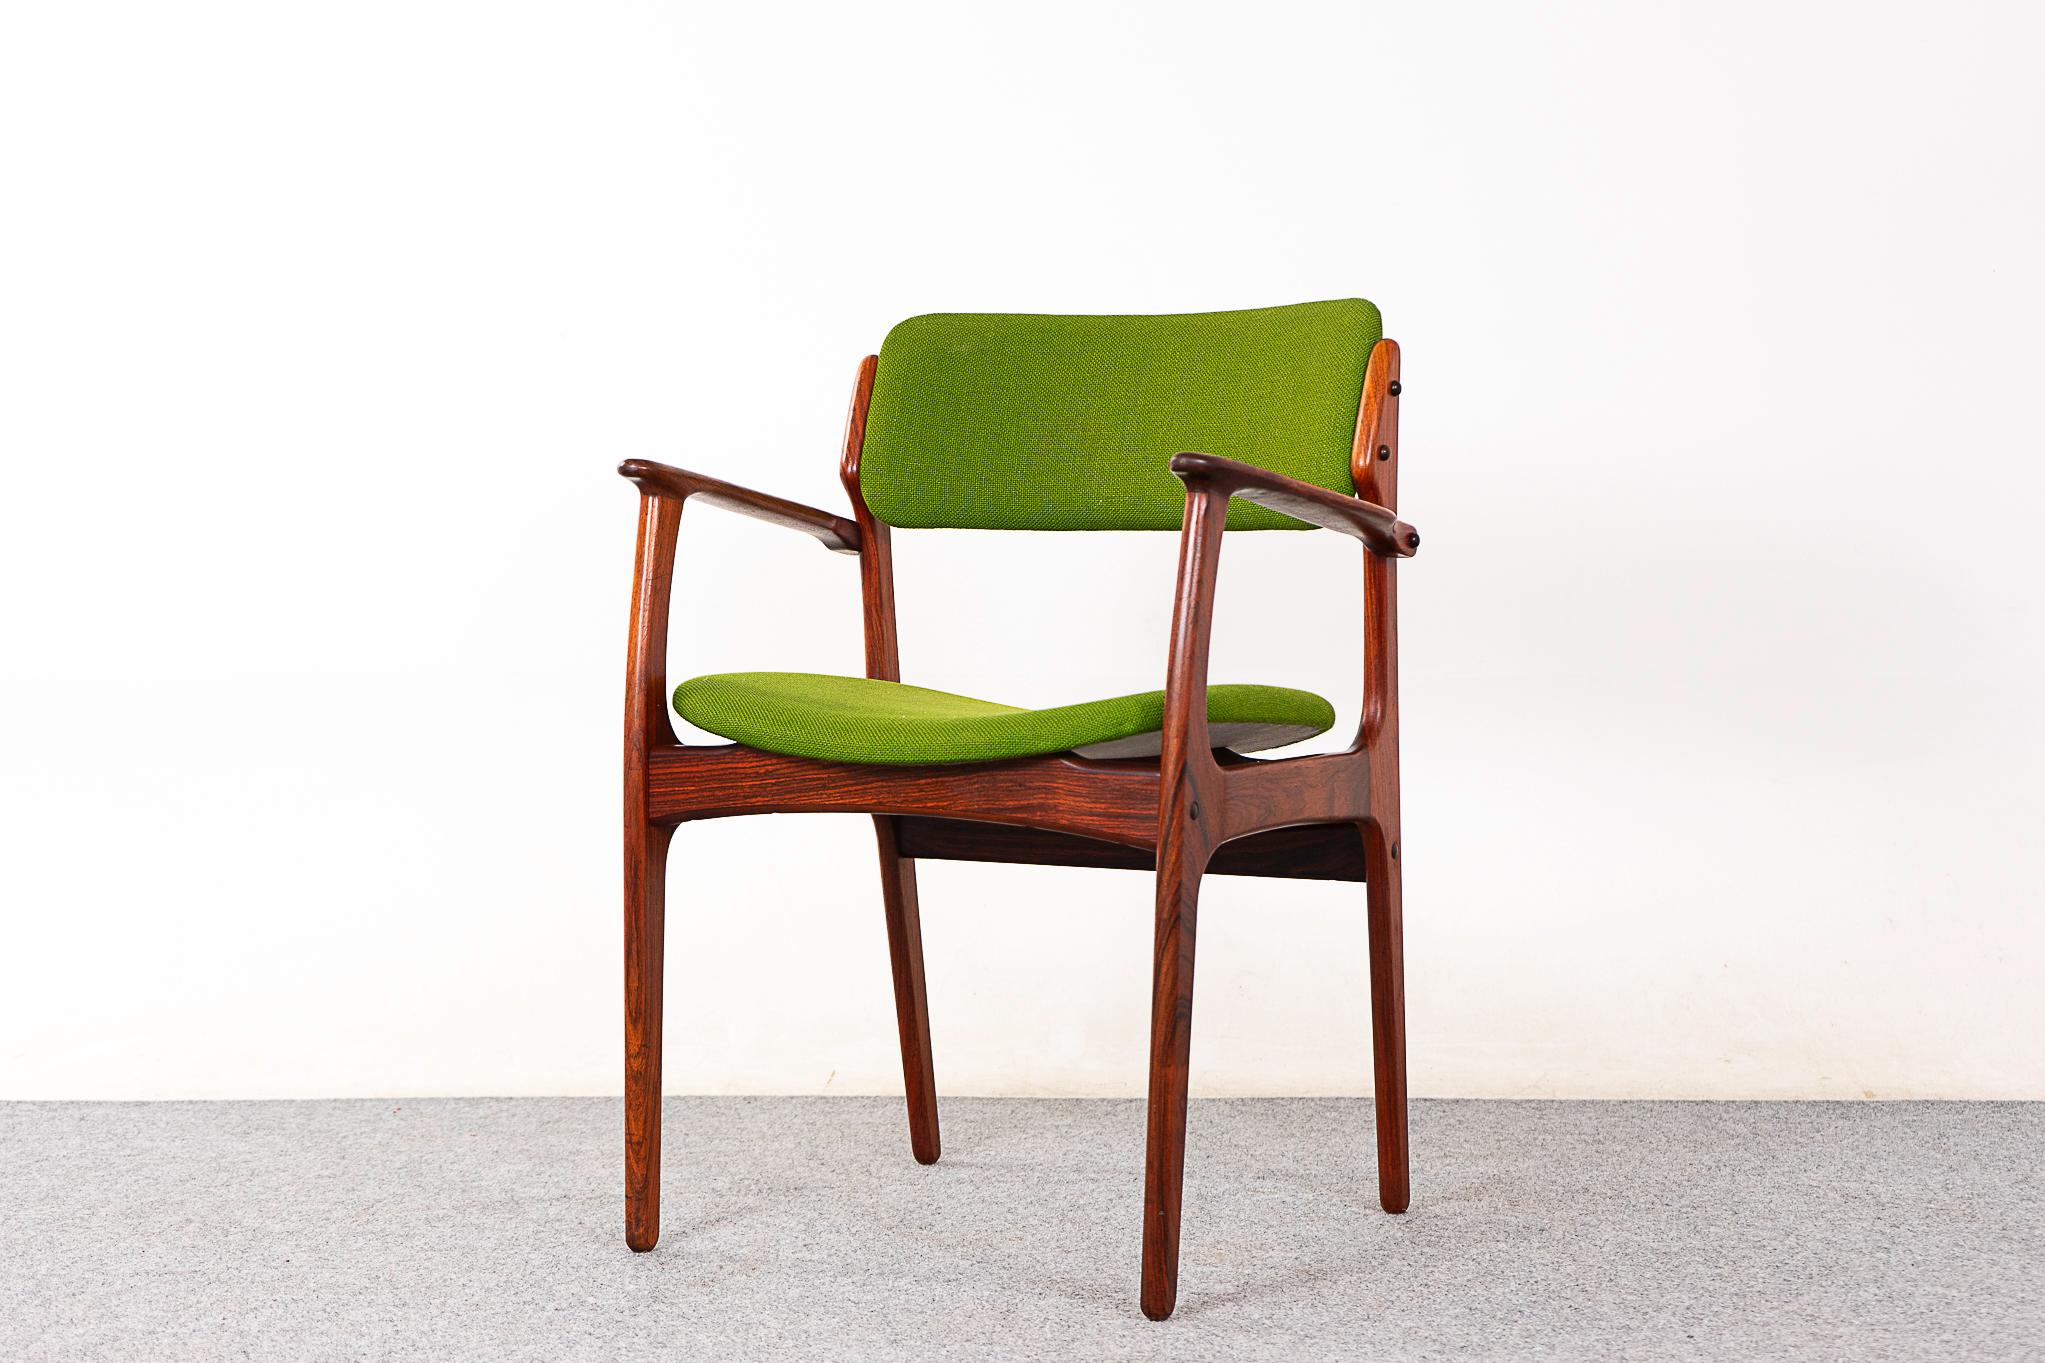 Rosewood Model 50 armchair by Erik Buch for Domus Danica, circa 1960's. Beautifully sculpted frame with stunning wood grain, comfort without an imposing footprint! Elegant floating bottom design. Makers mark intact. Original upholstery with minor